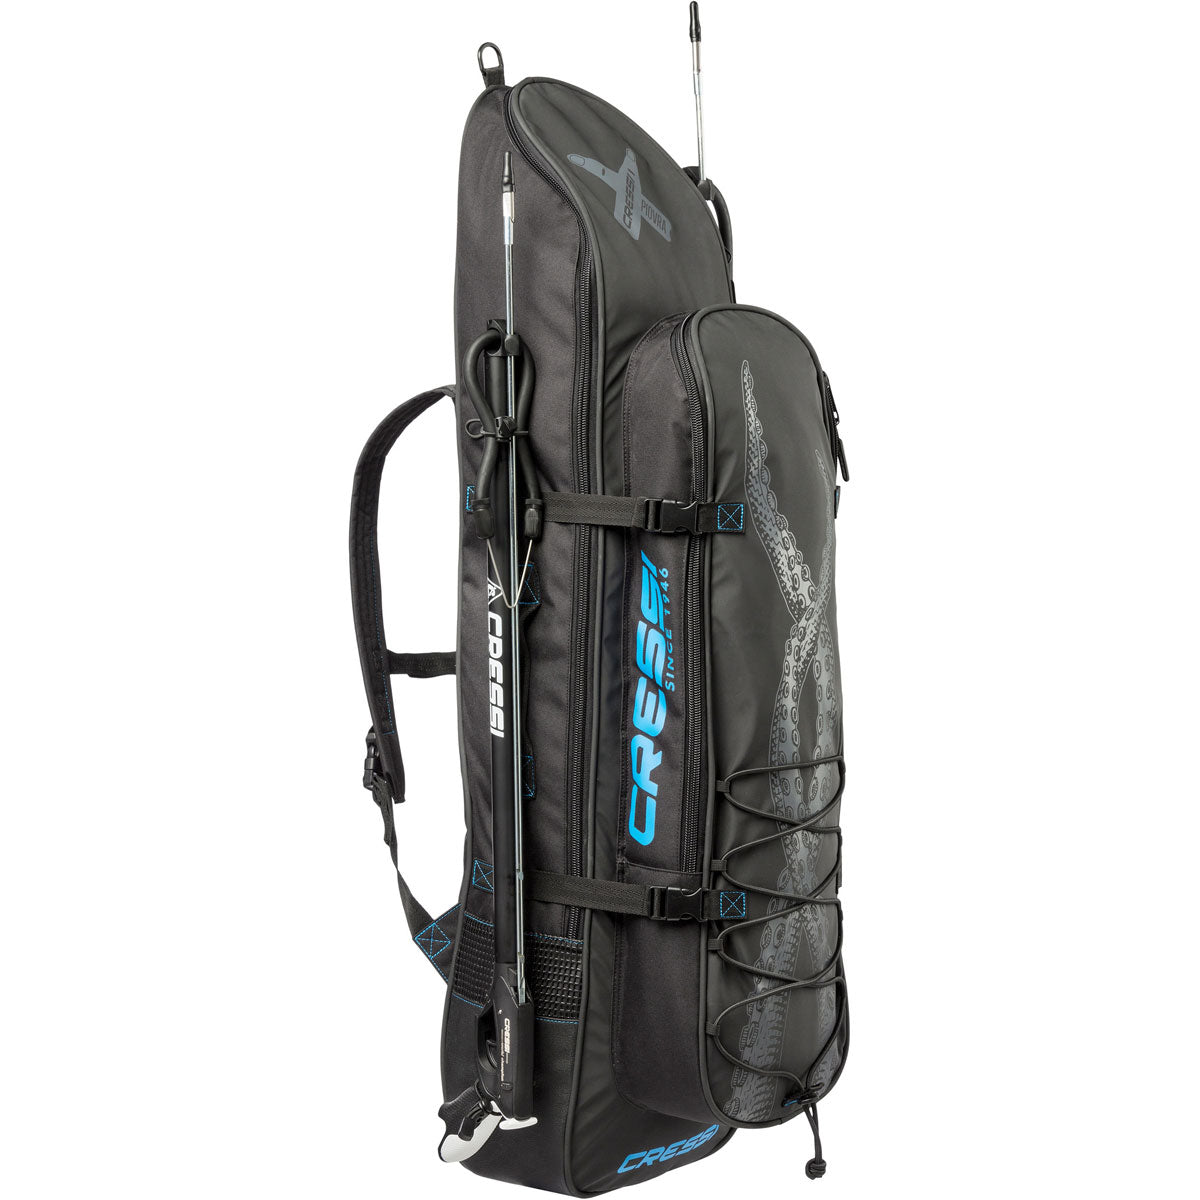 Open Box Cressi Piovra Waterproof Backpack for Freediving and Spearfishing  Gear (Xtra Large)